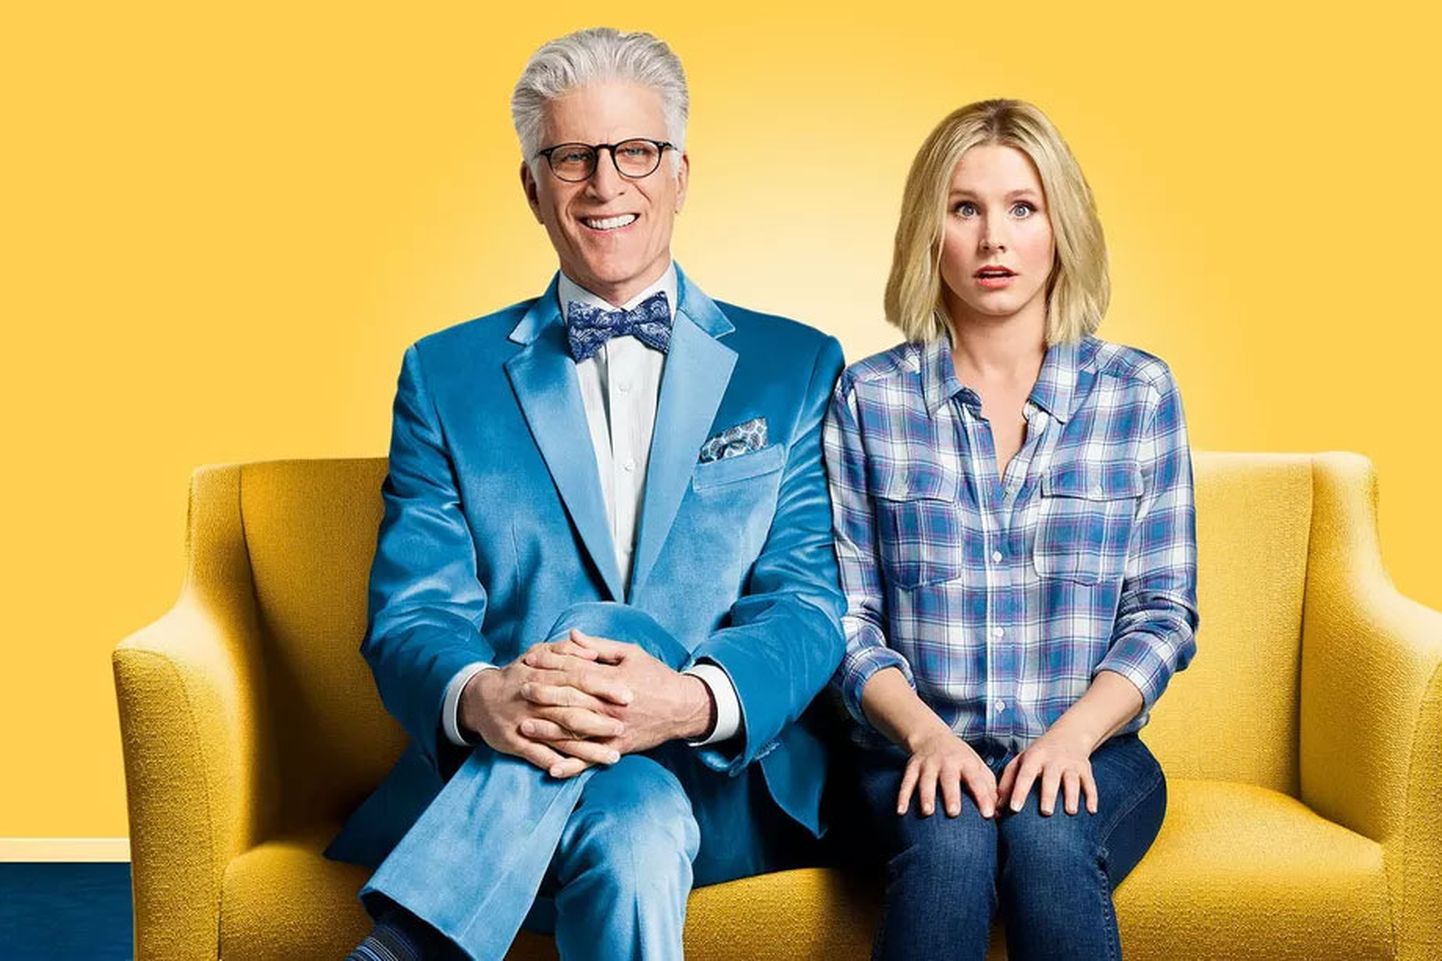 The Good Place